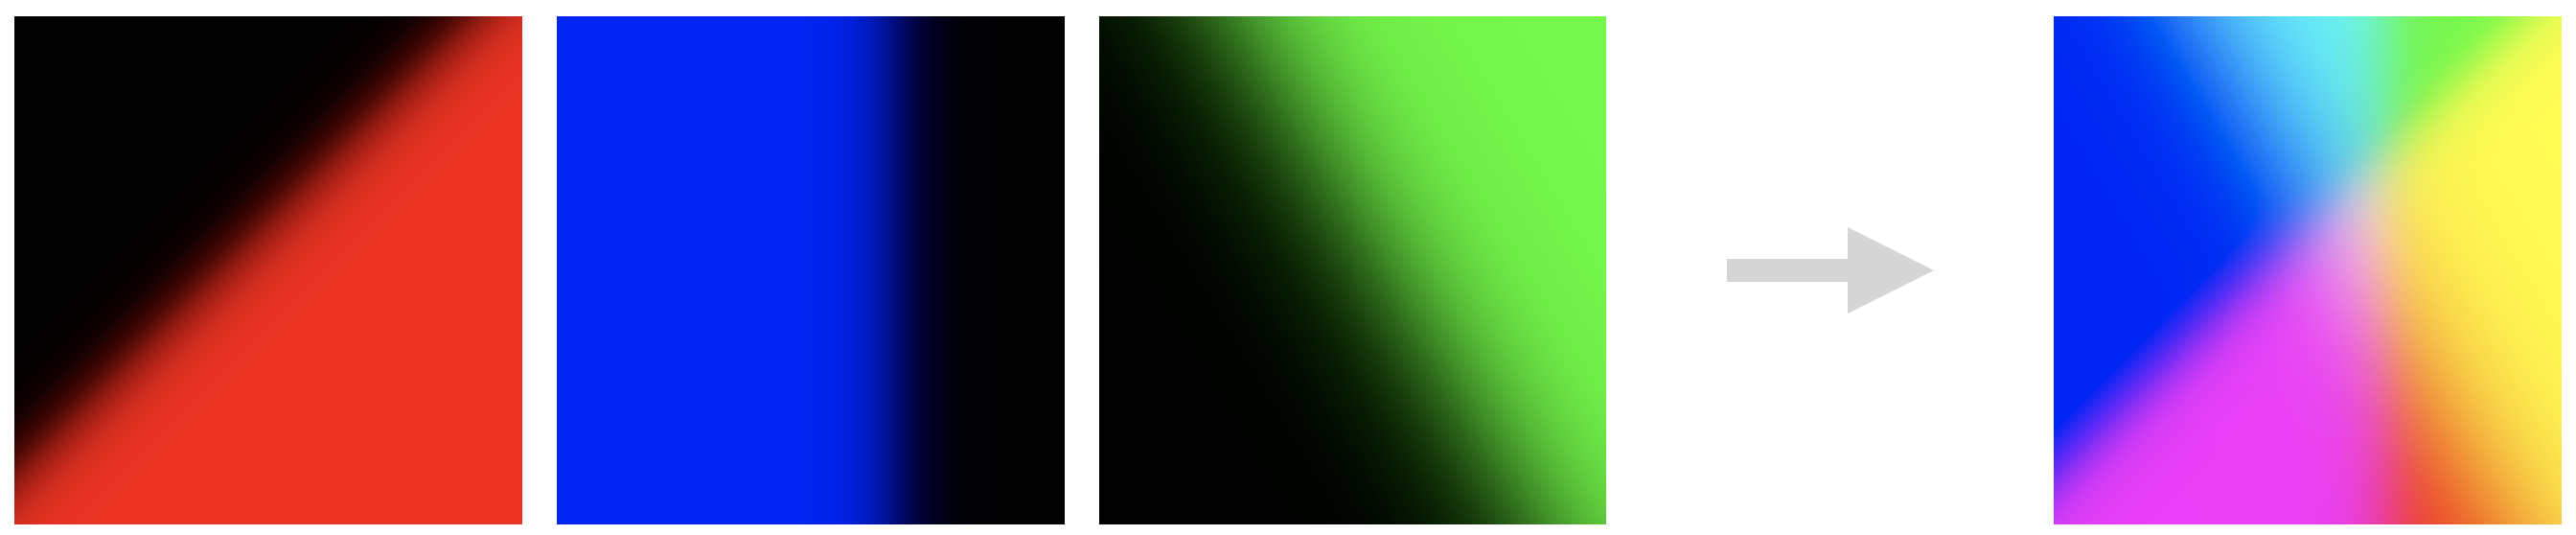 Figure 6: We can simultaneously render three different 2D plots by rending then as red, green, and blue intensities, respectively. This is an example using simple sigmoid curves.